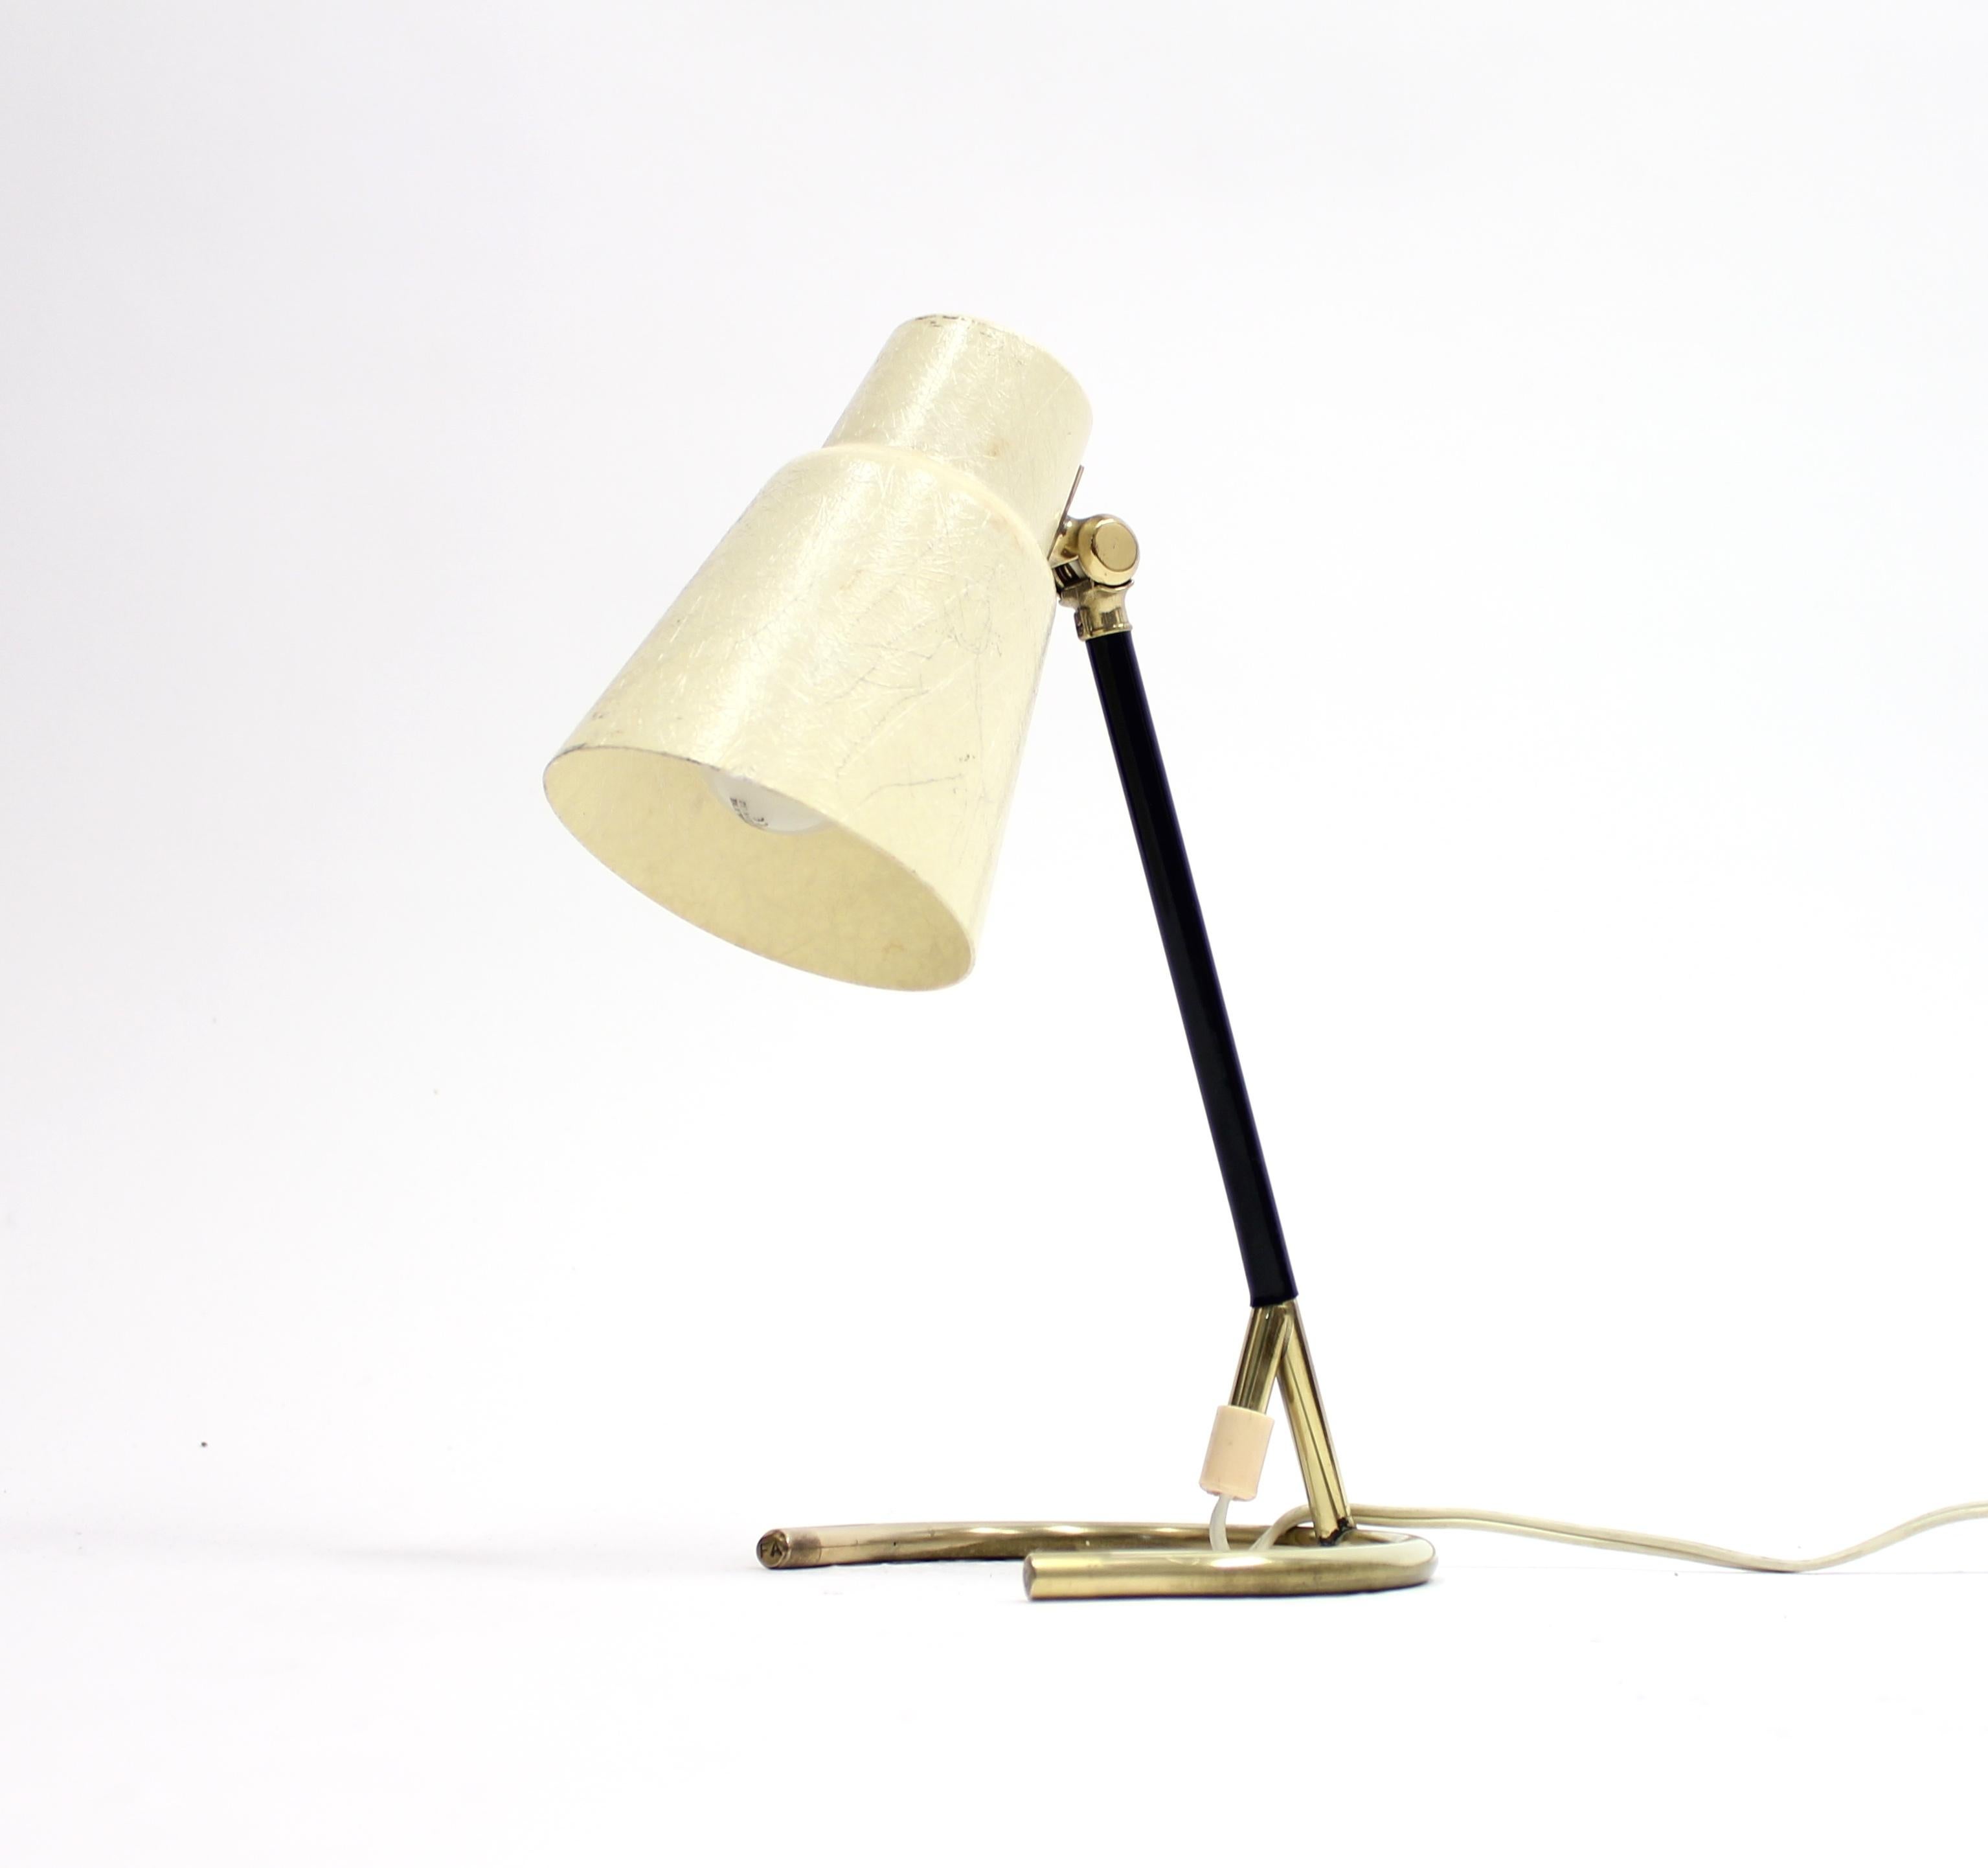 Brass table lamp with circular foot, off-white fibreglass shade. Most likely made in Sweden by Falkenbergs belysning. Marked 